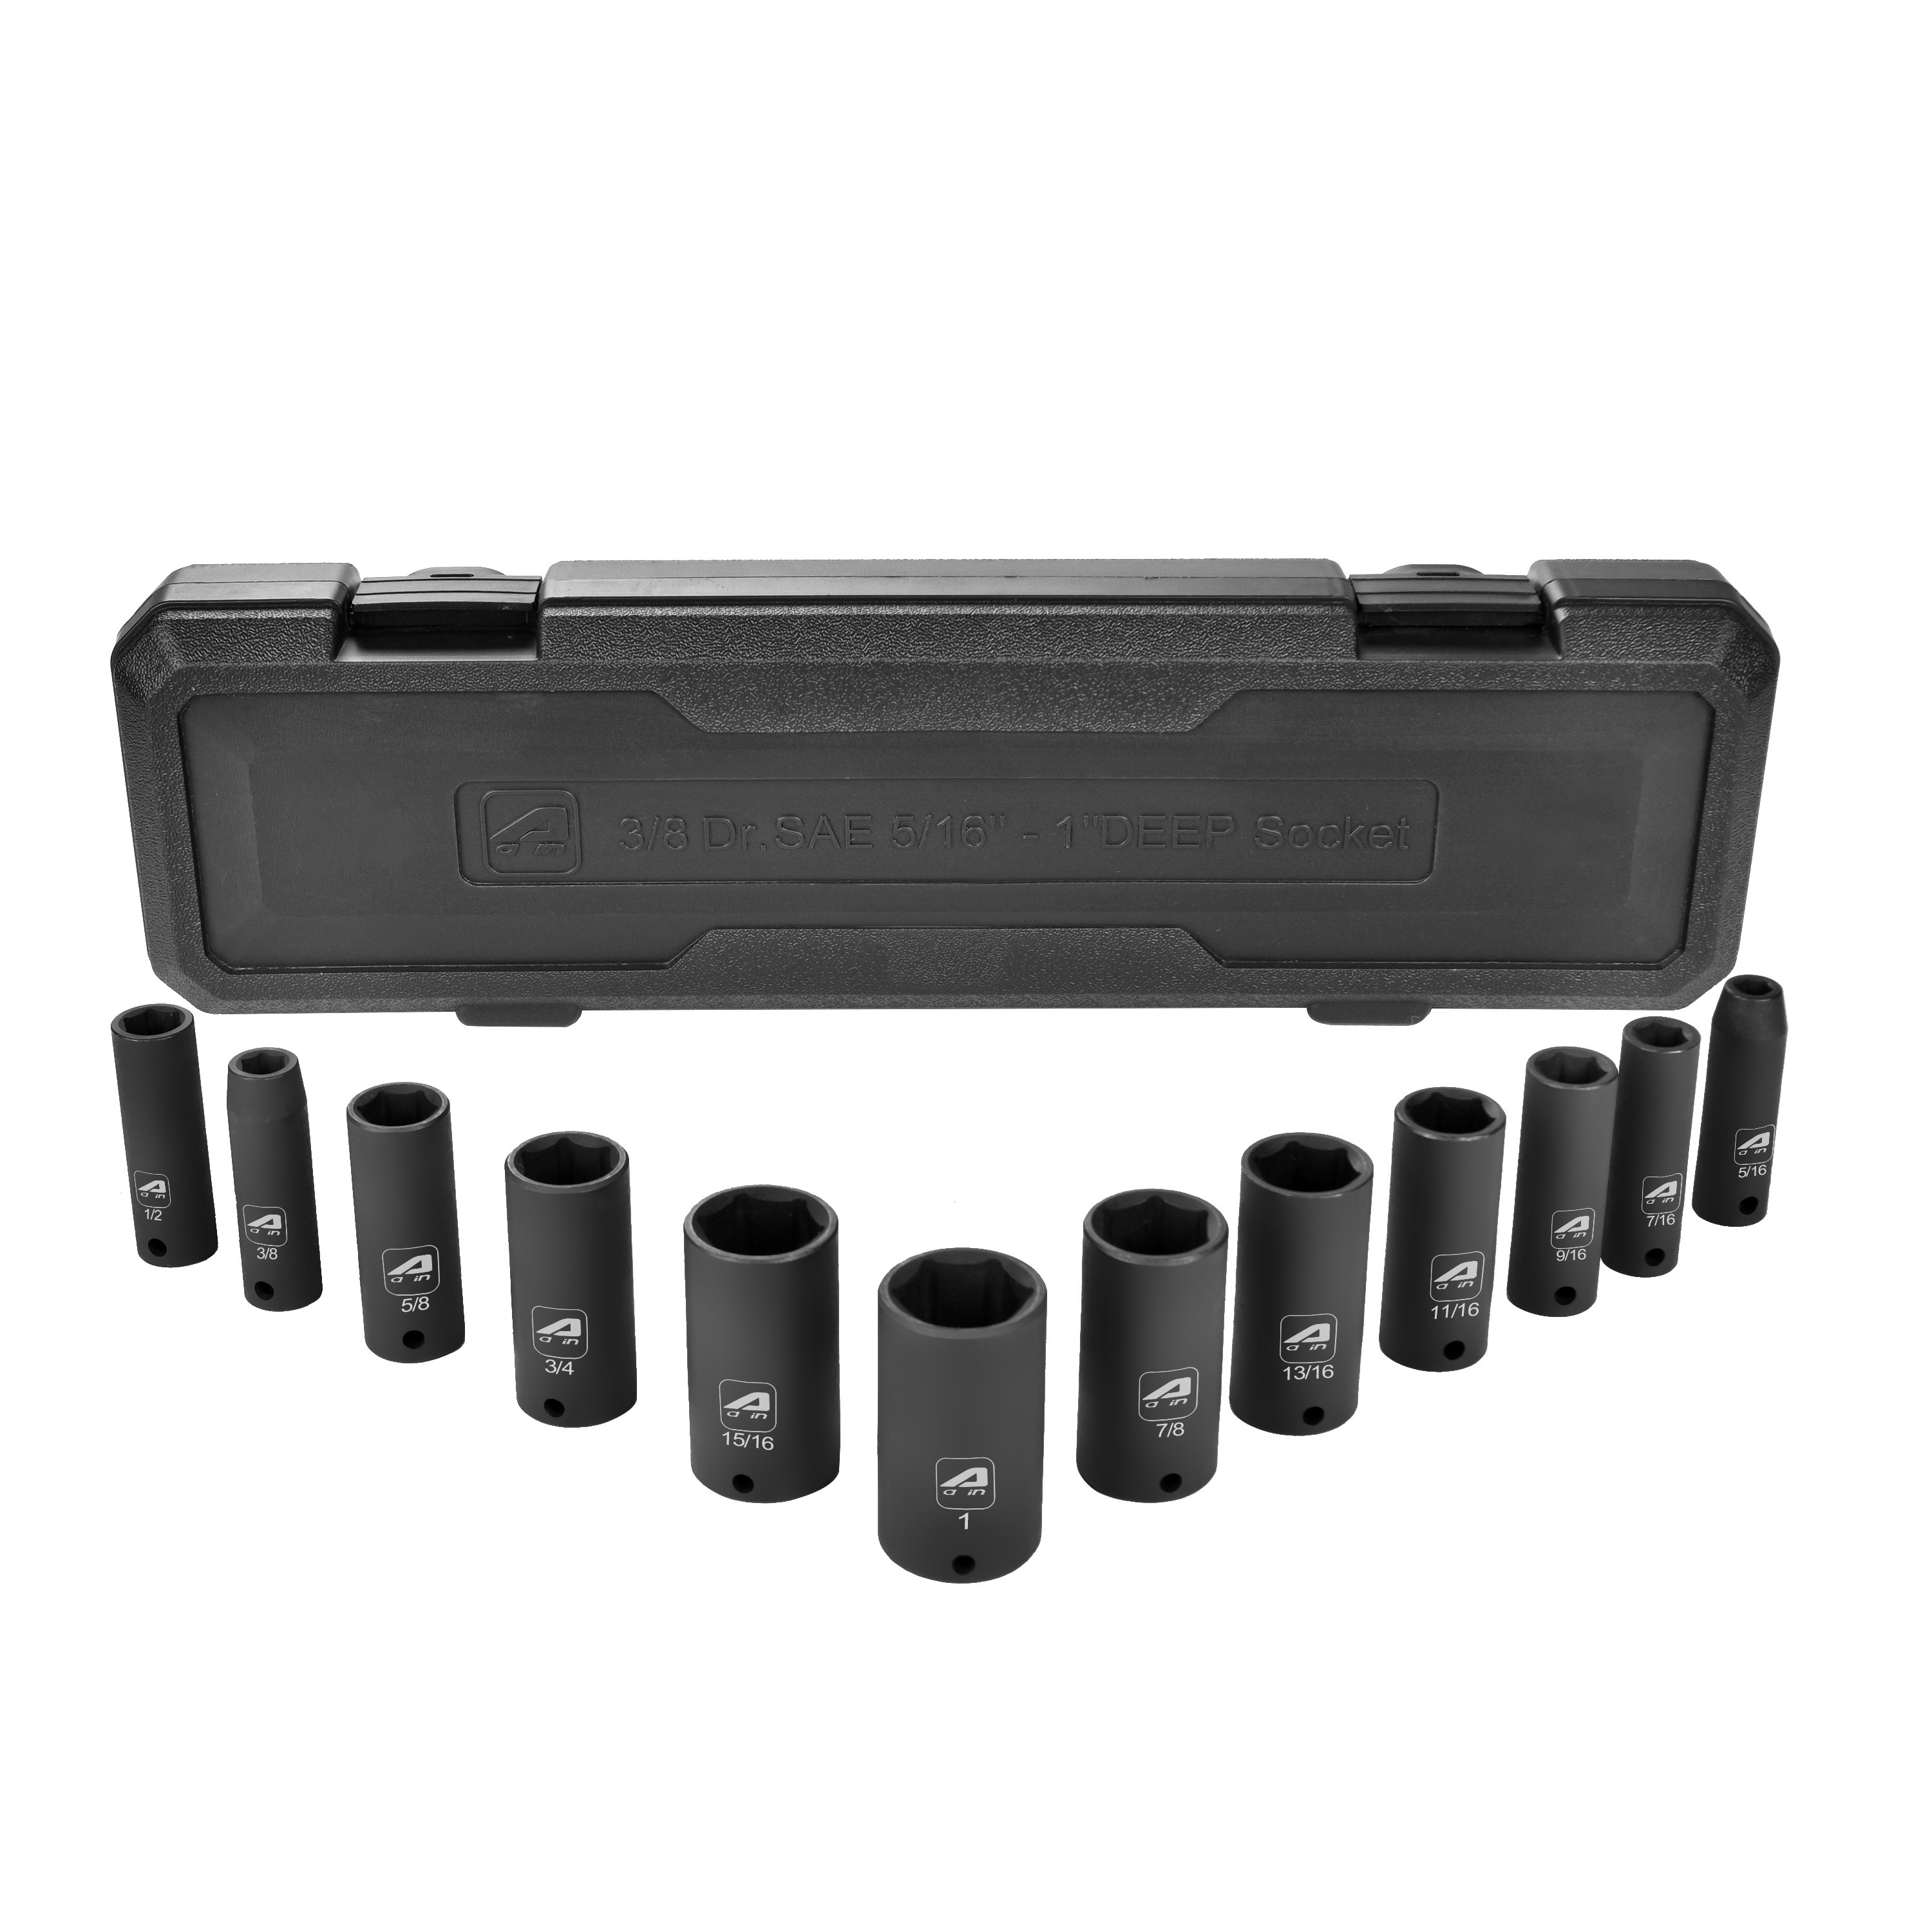 

Aain 12 Piece 3/8 Inch Drive Sae Deep Impact Socket Set, 5/16'' To 1'' 6-point Socket Sets For Mechanic With Carrying Case, A031, Black